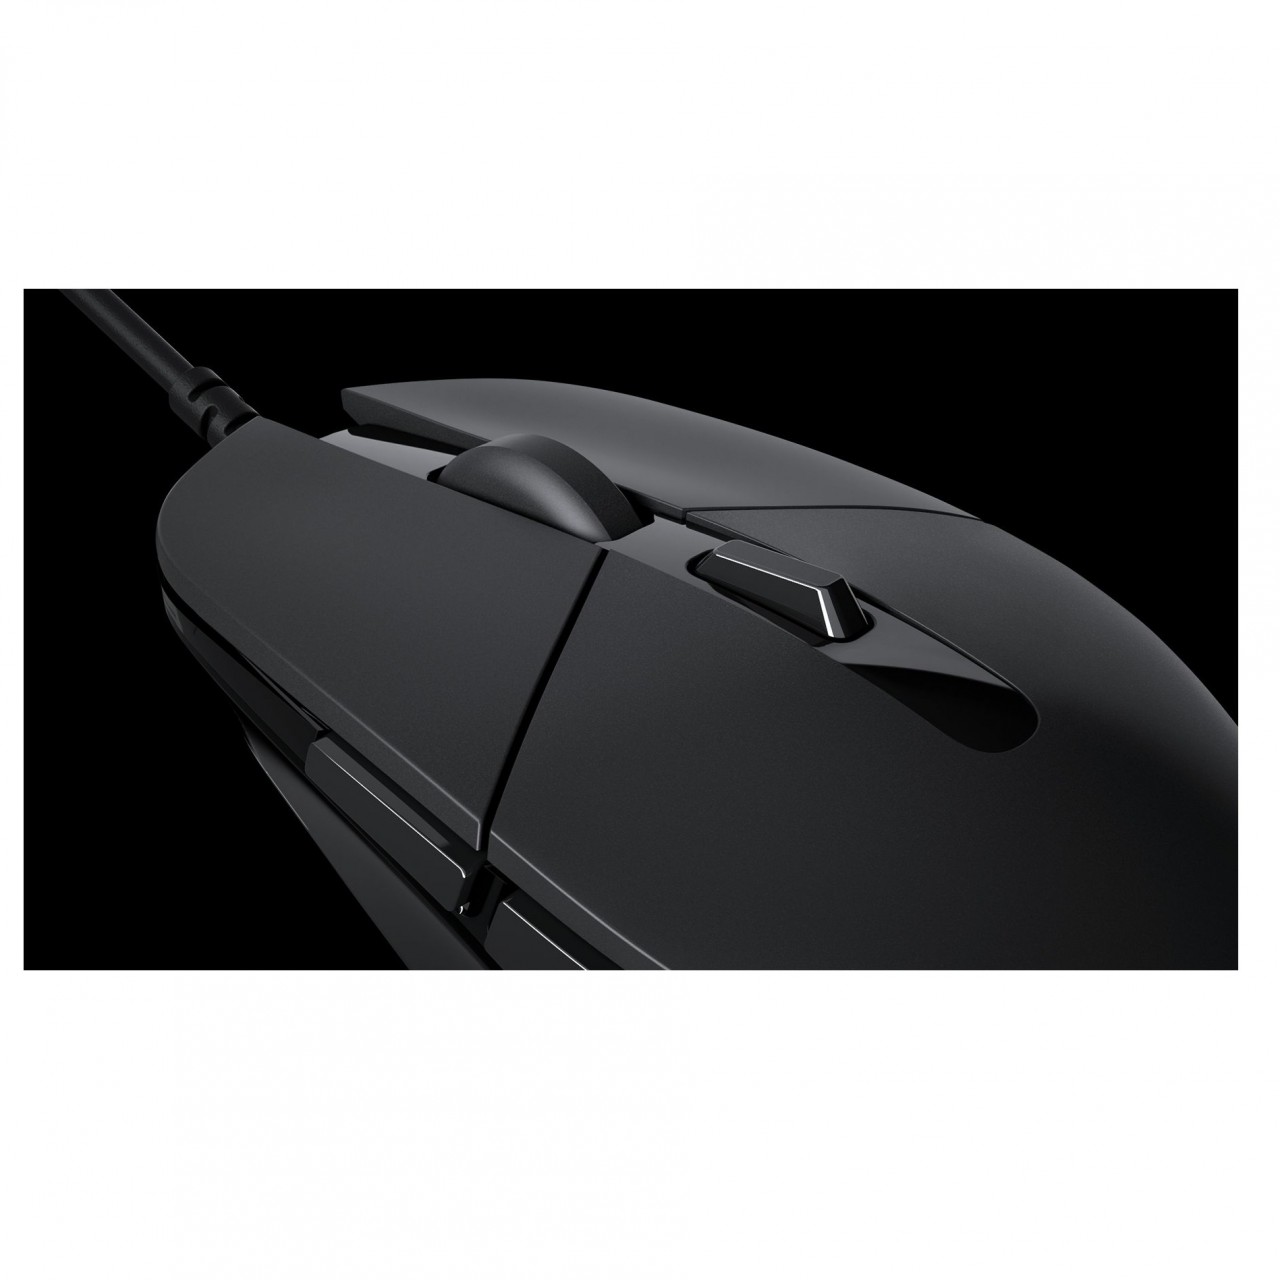 Logitech G302 Daedalus Prime Moba Gaming Mouse With Six Programmable Buttons